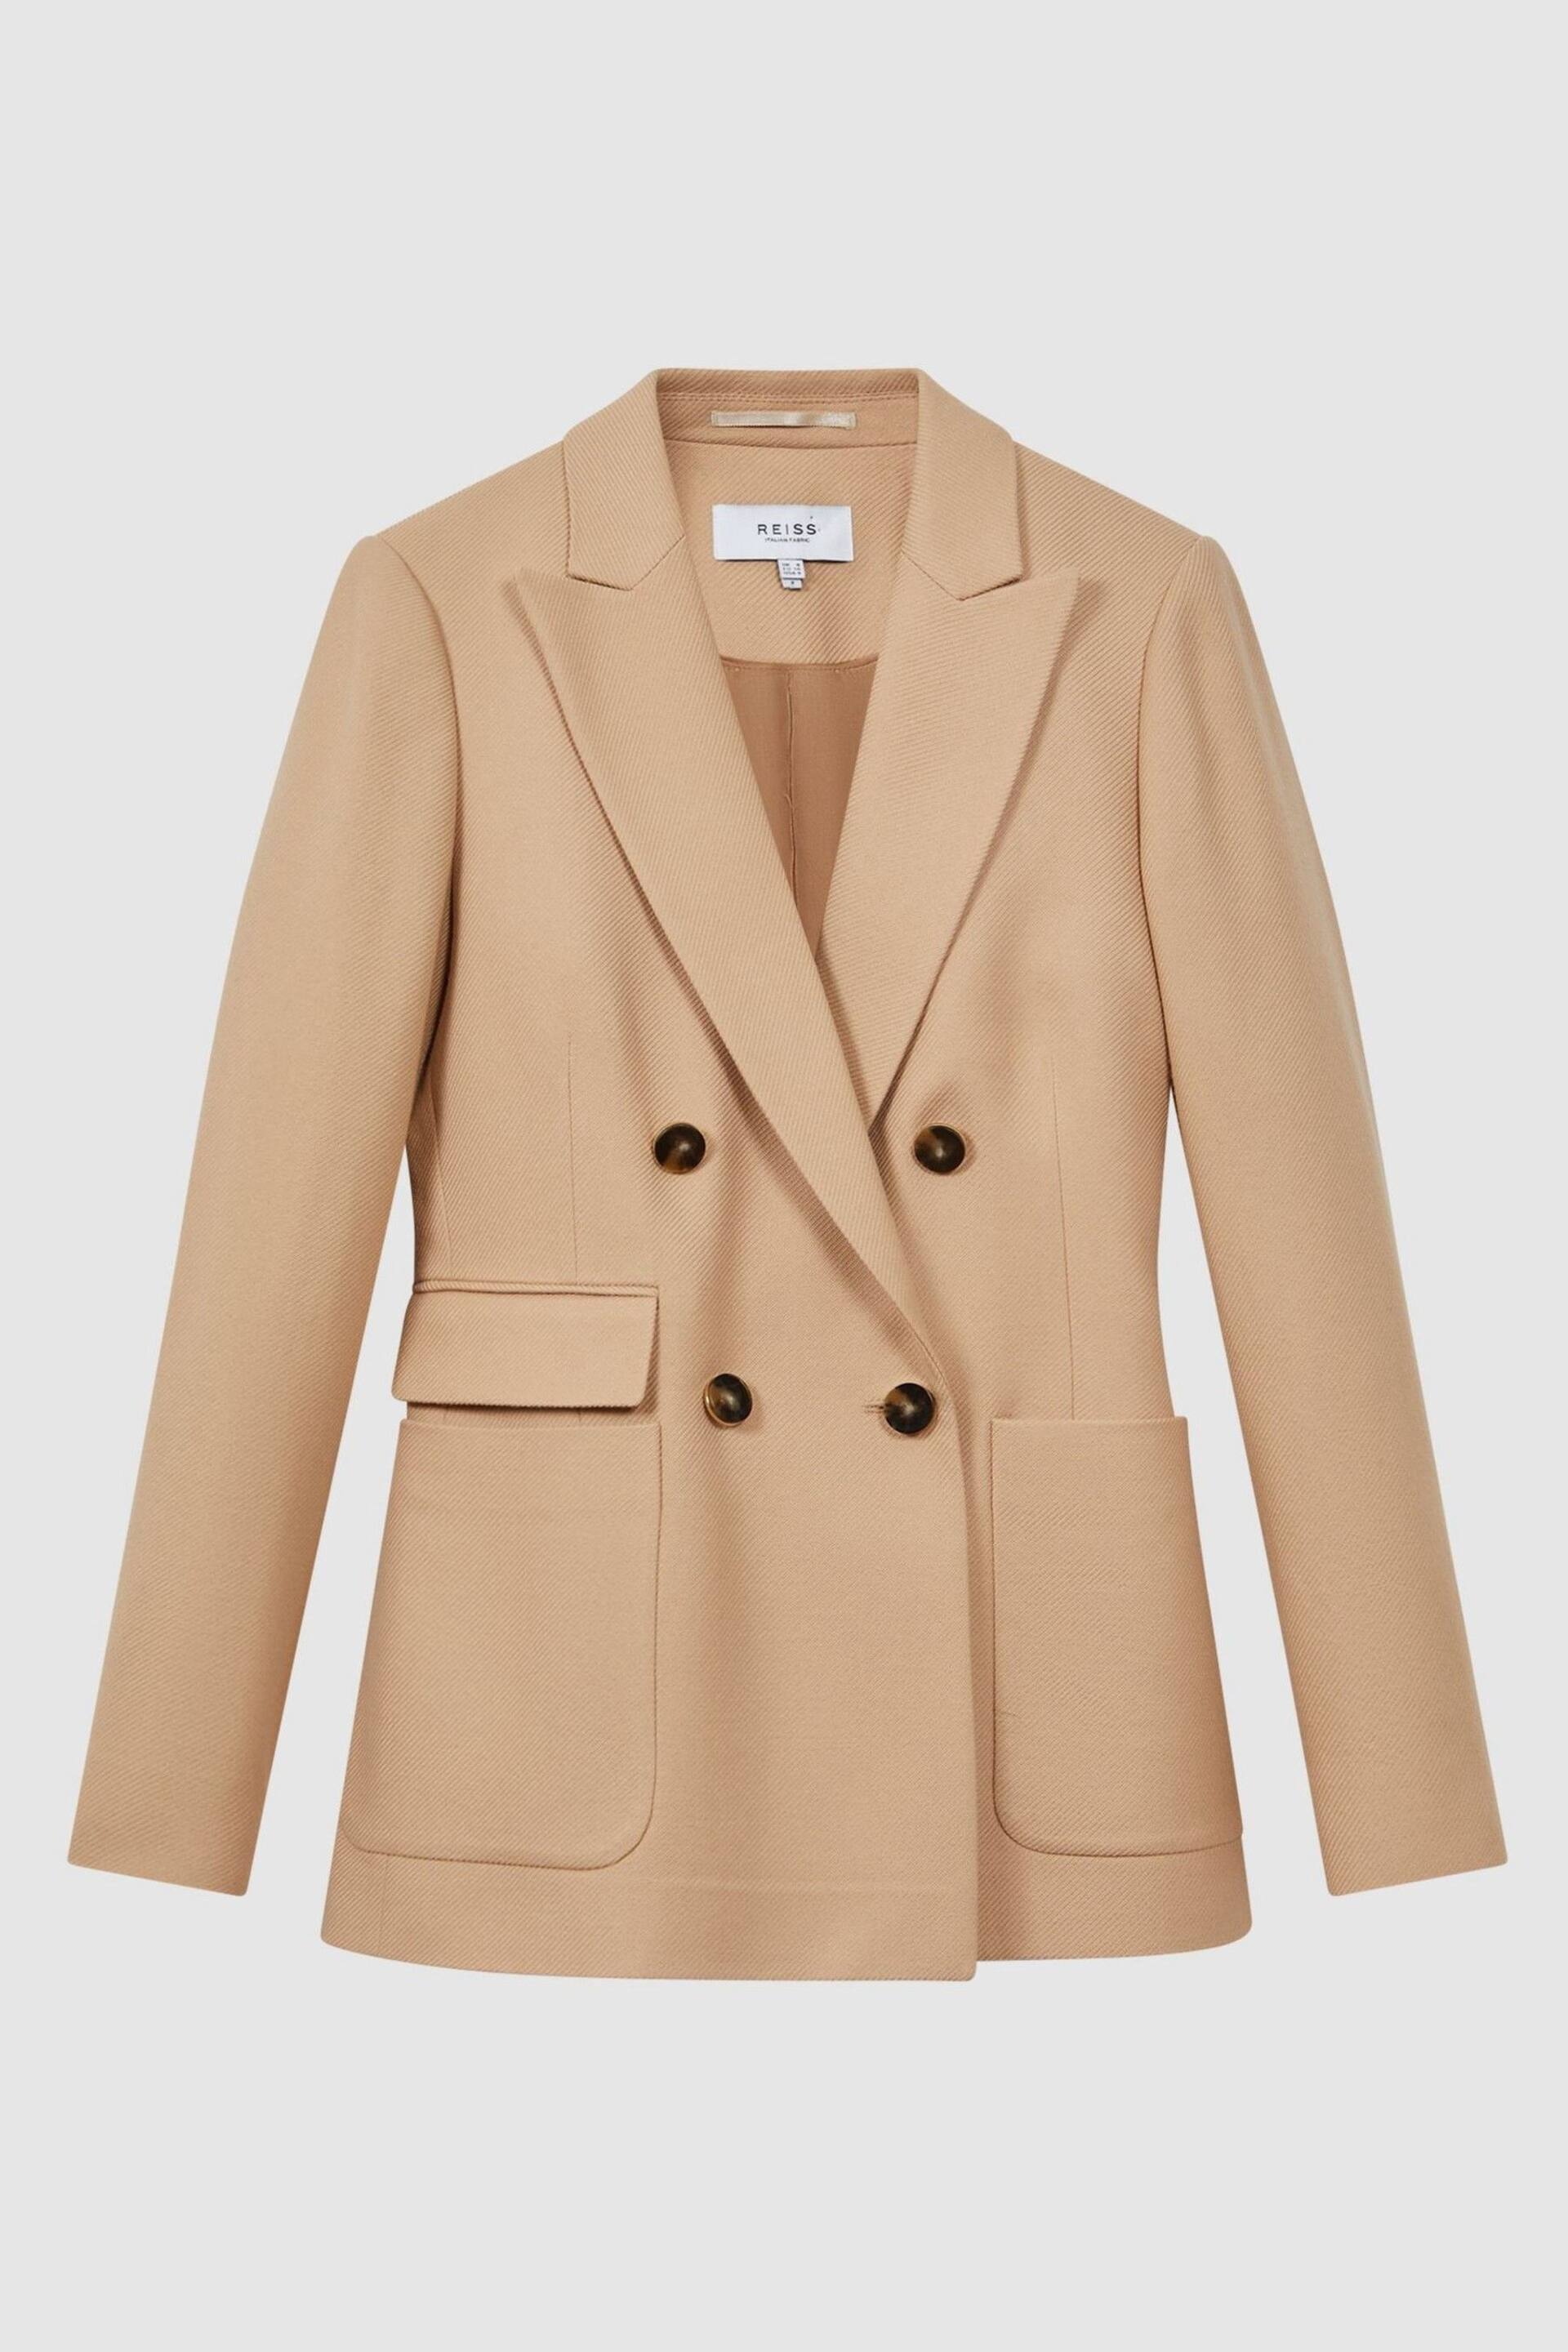 Reiss Light Camel Larsson Petite Double Breasted Twill Blazer - Image 2 of 8